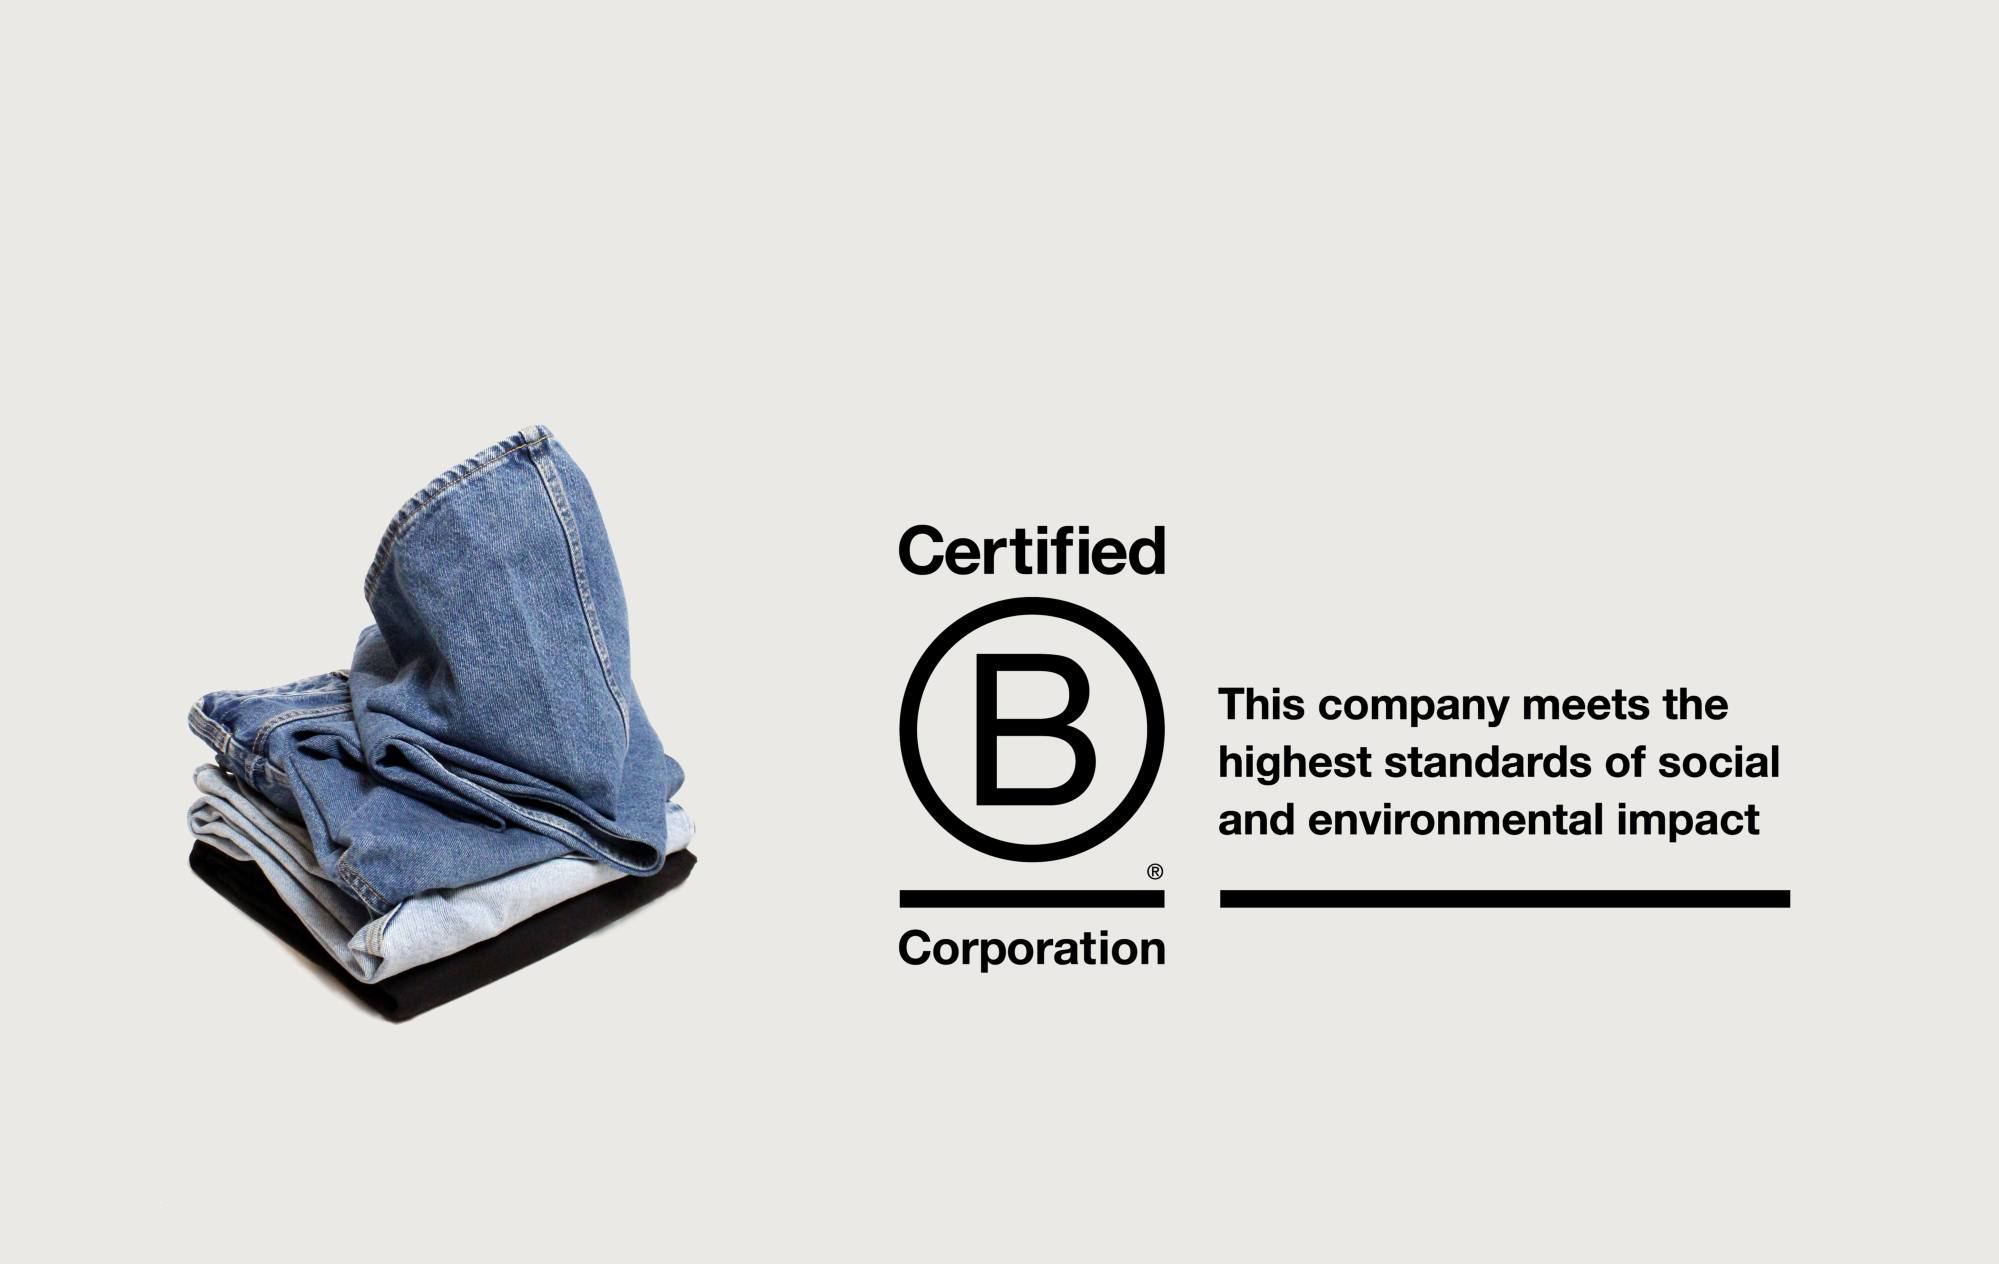 Vestiaire collective - Certified B Corporation - B Lab Global